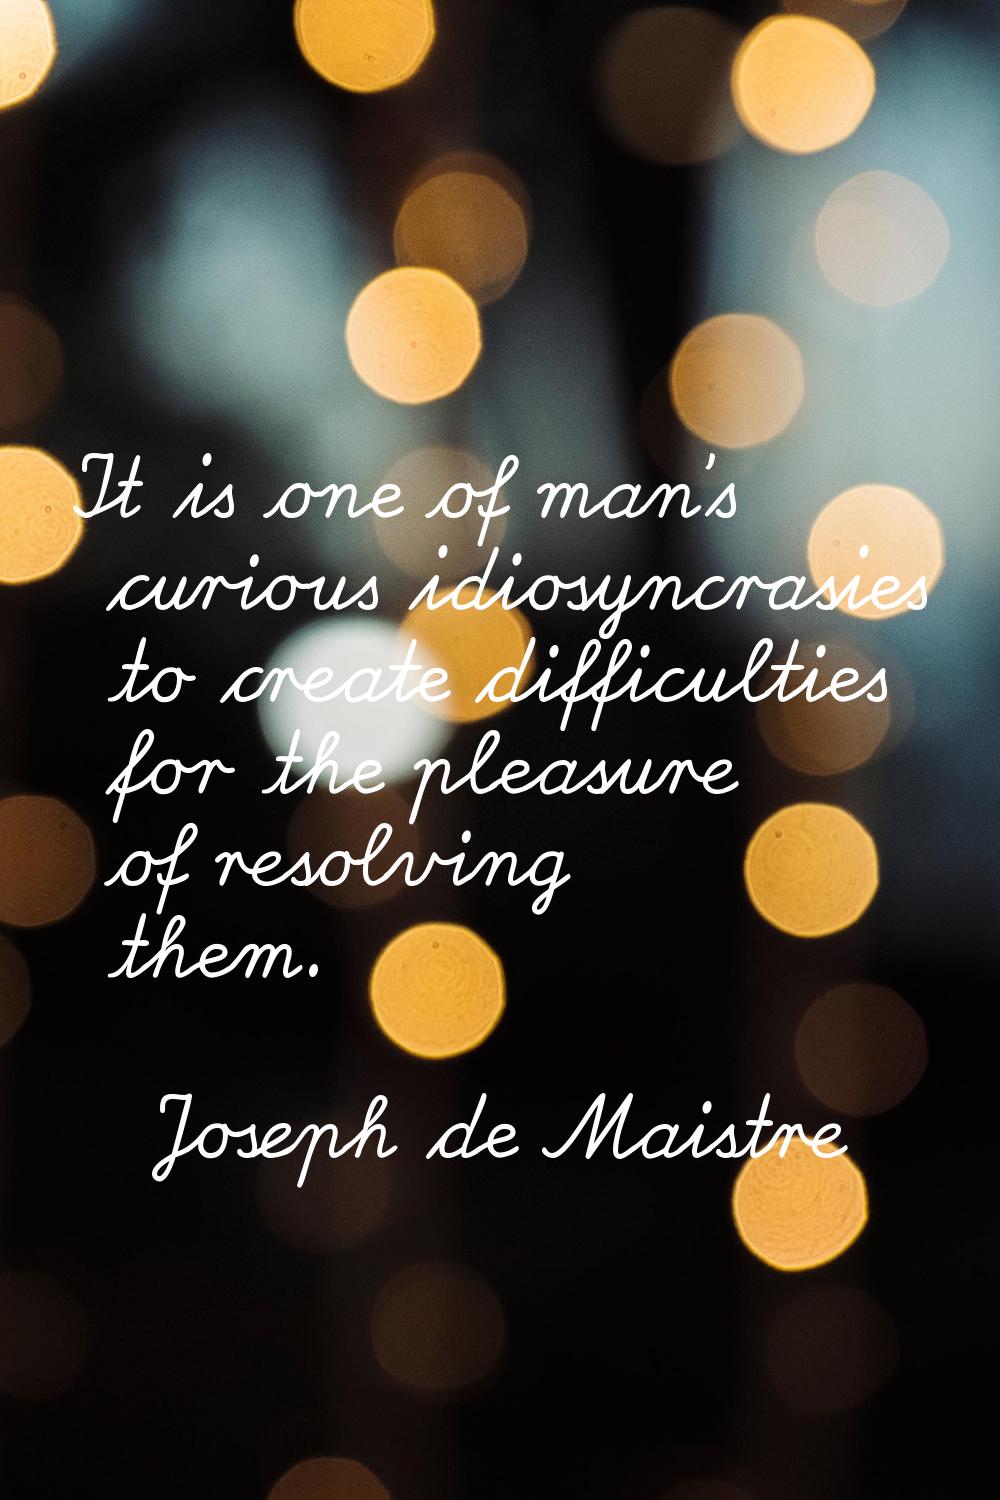 It is one of man's curious idiosyncrasies to create difficulties for the pleasure of resolving them